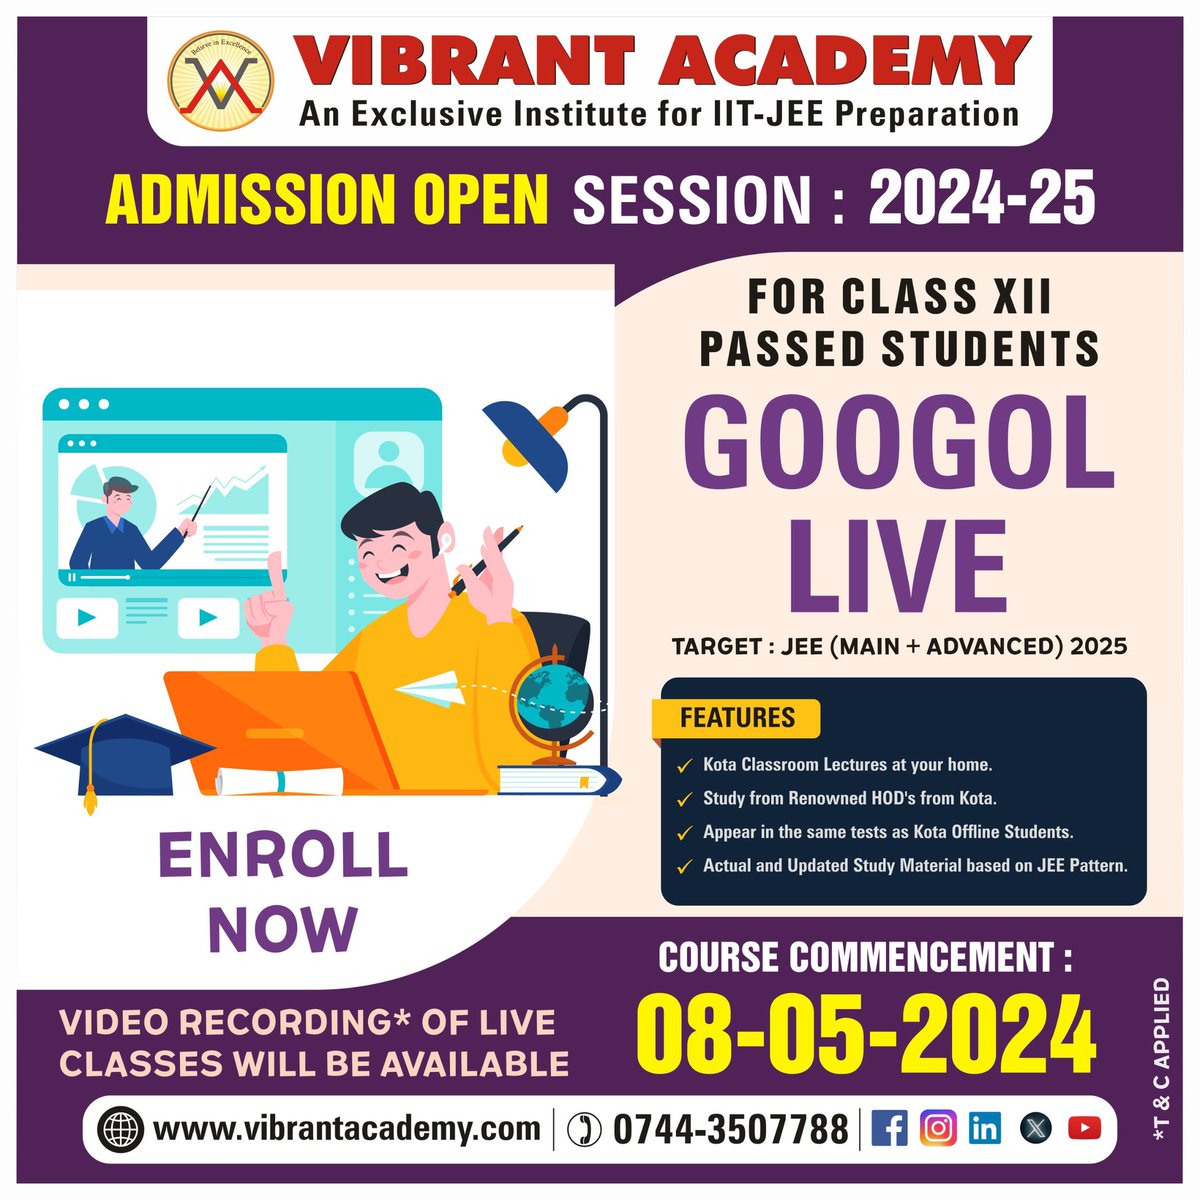 📣Admission Open for Session 2024-25
✅GOOGOL LIVE (JEE Main + ADVANCED 2025) for 12th passed students.
☎ Contact Us - 0744-3507788
🕸 Visit- vibrantacademy.com
#VibrantAcademy  #Googollive #kotacoaching #kota #iitjee #JEEMains #JEEADVANCED #iitjeepreparation #jeemains2024